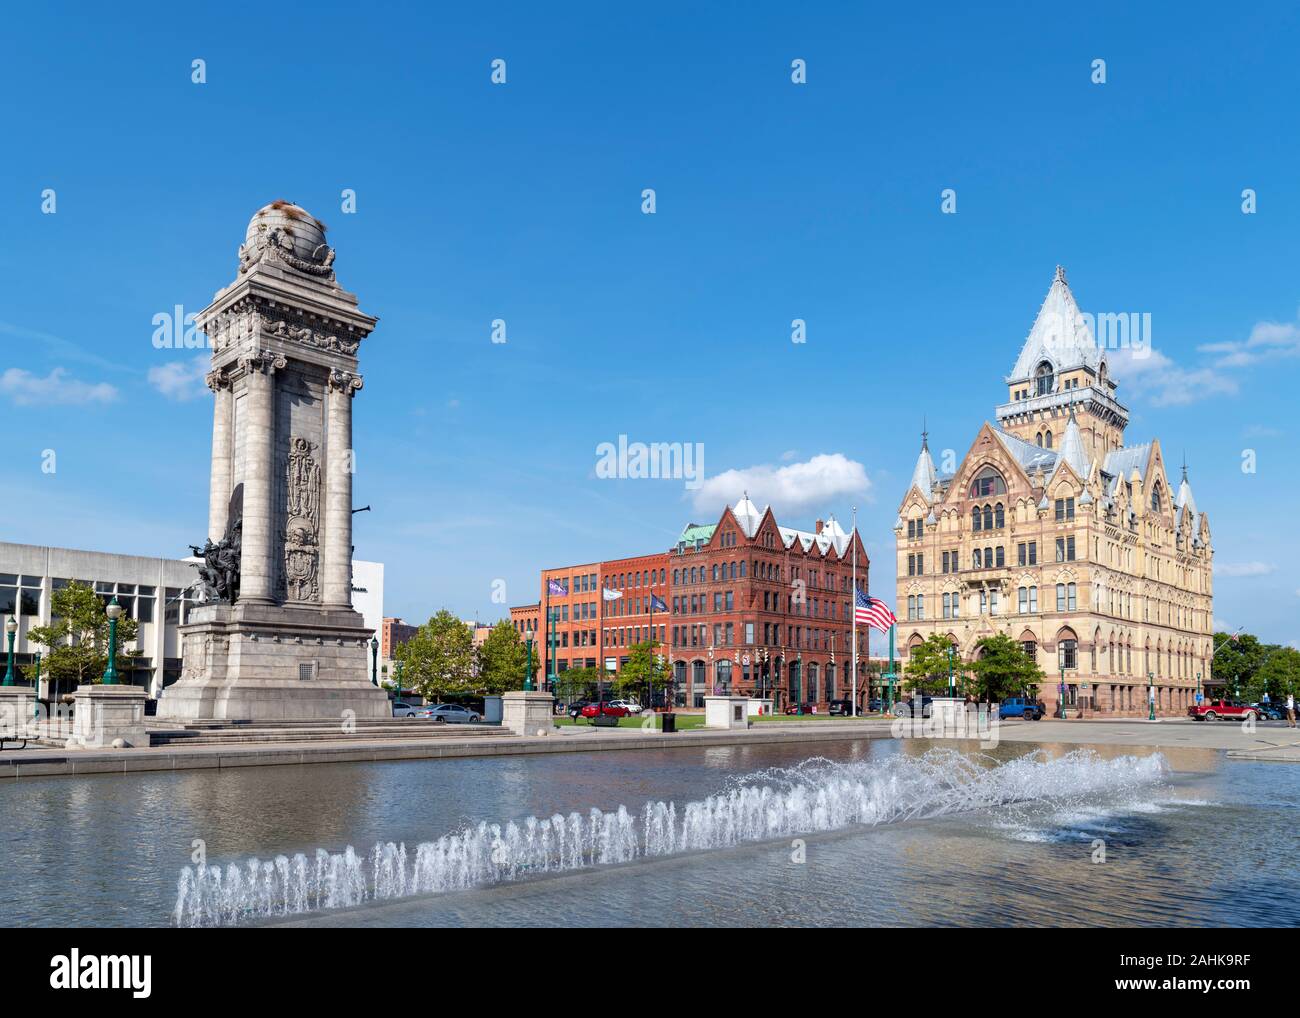 Clinton Square in historic downtown Syracuse, New York State, USA. The Soldiers' and Sailors' Monument on the left of the picture. Stock Photo